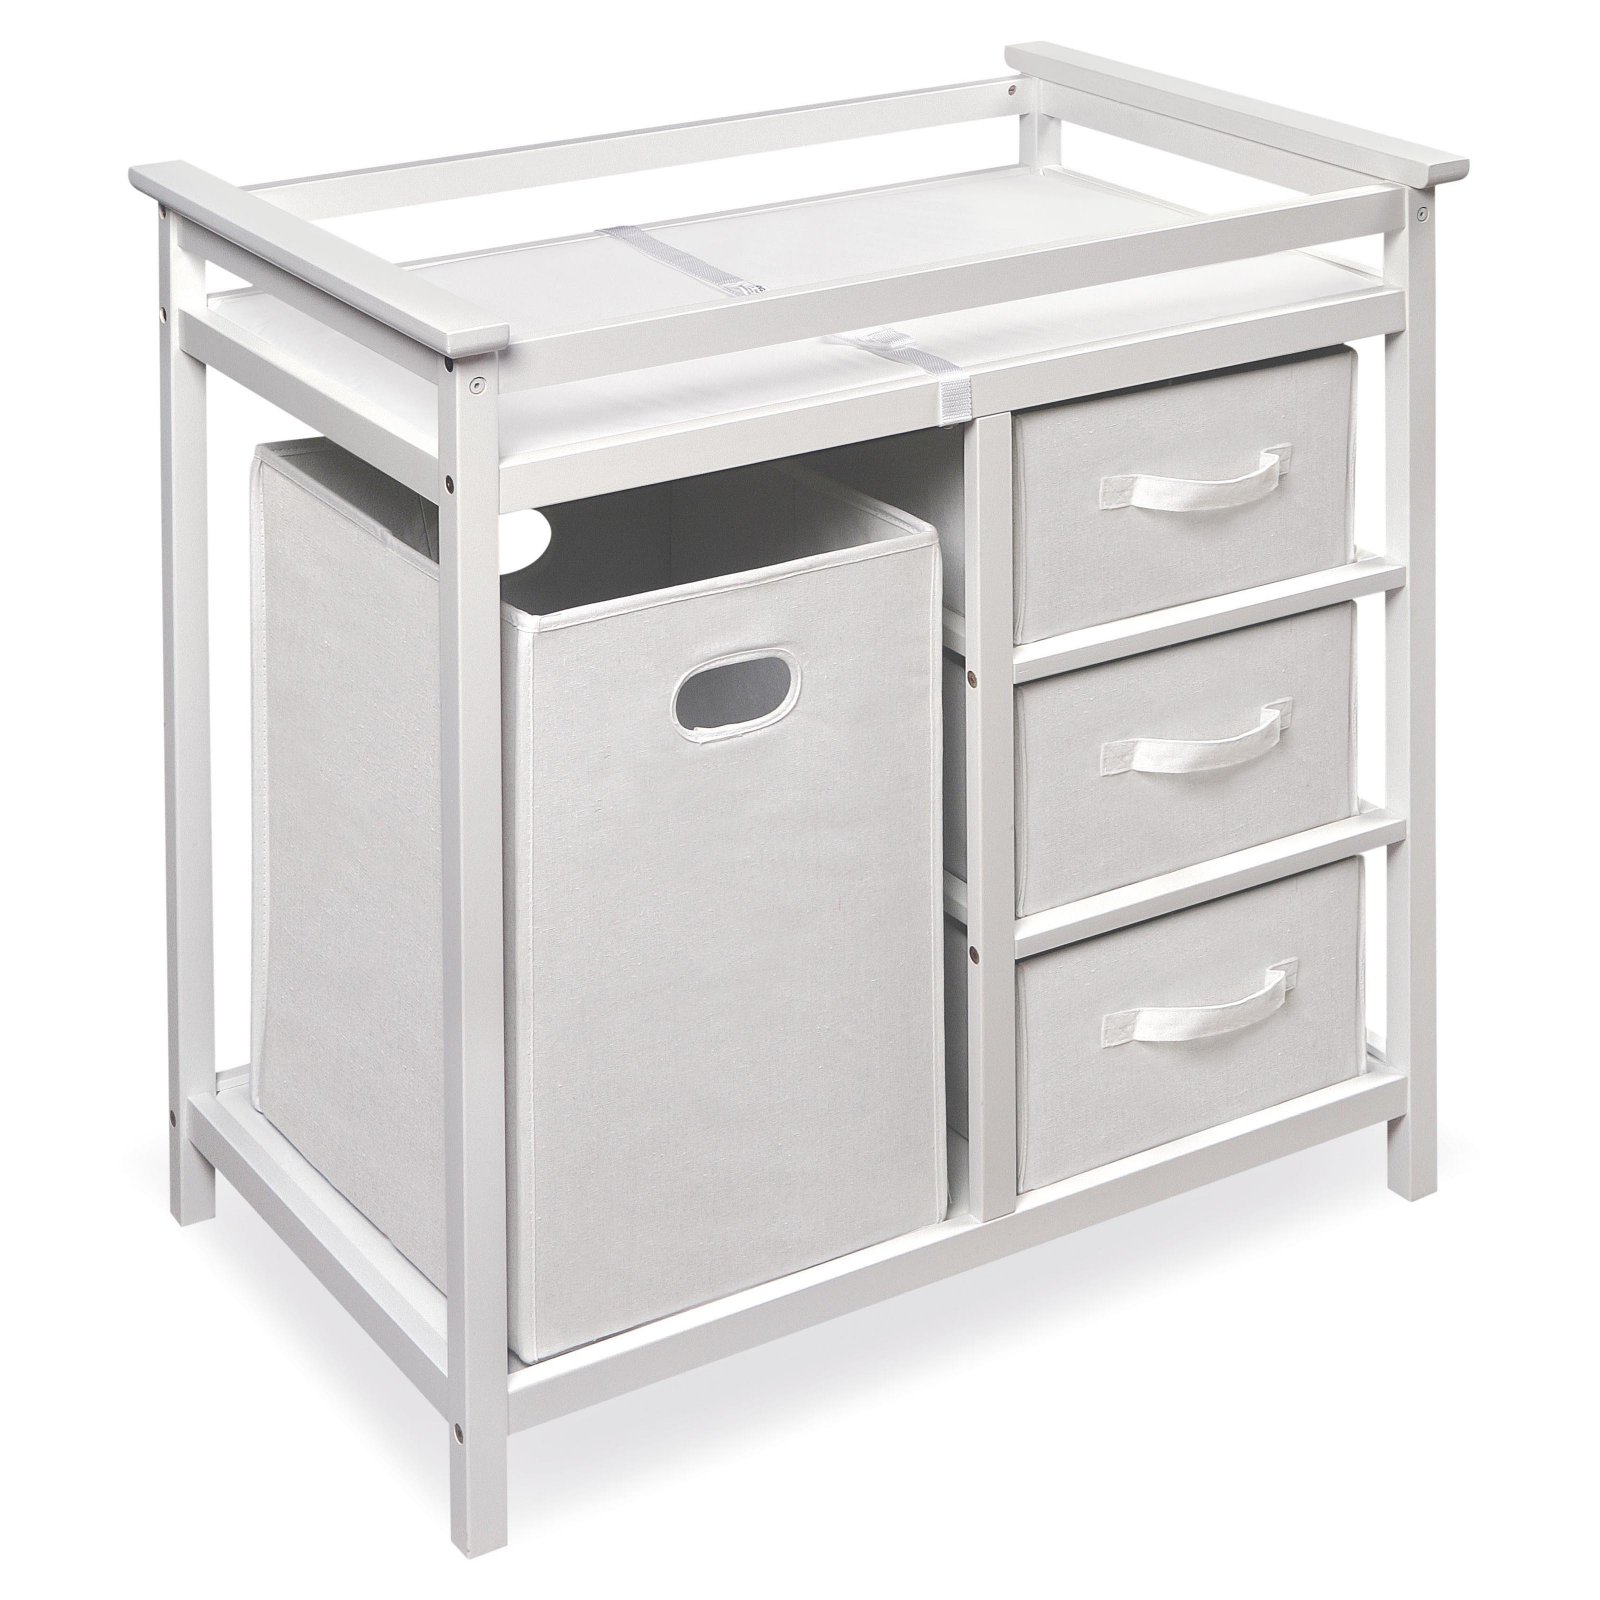 Badger Basket Modern Baby Changing Table with Hamper and 3 Baskets, White, Includes Pad - image 1 of 6